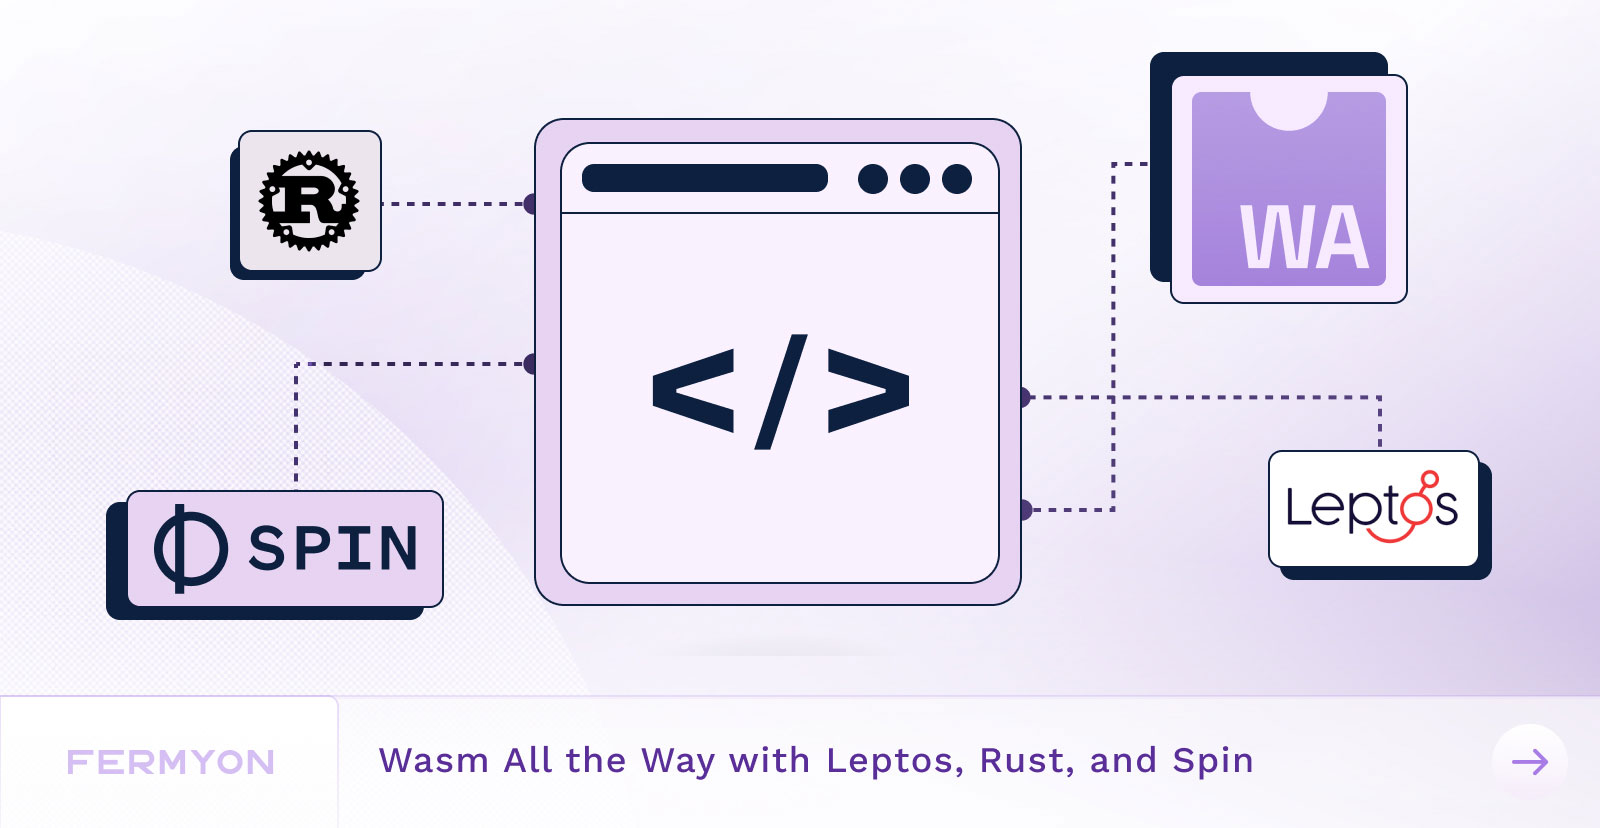 Wasm All the Way - From Client to Server With Leptos, Rust and Spin